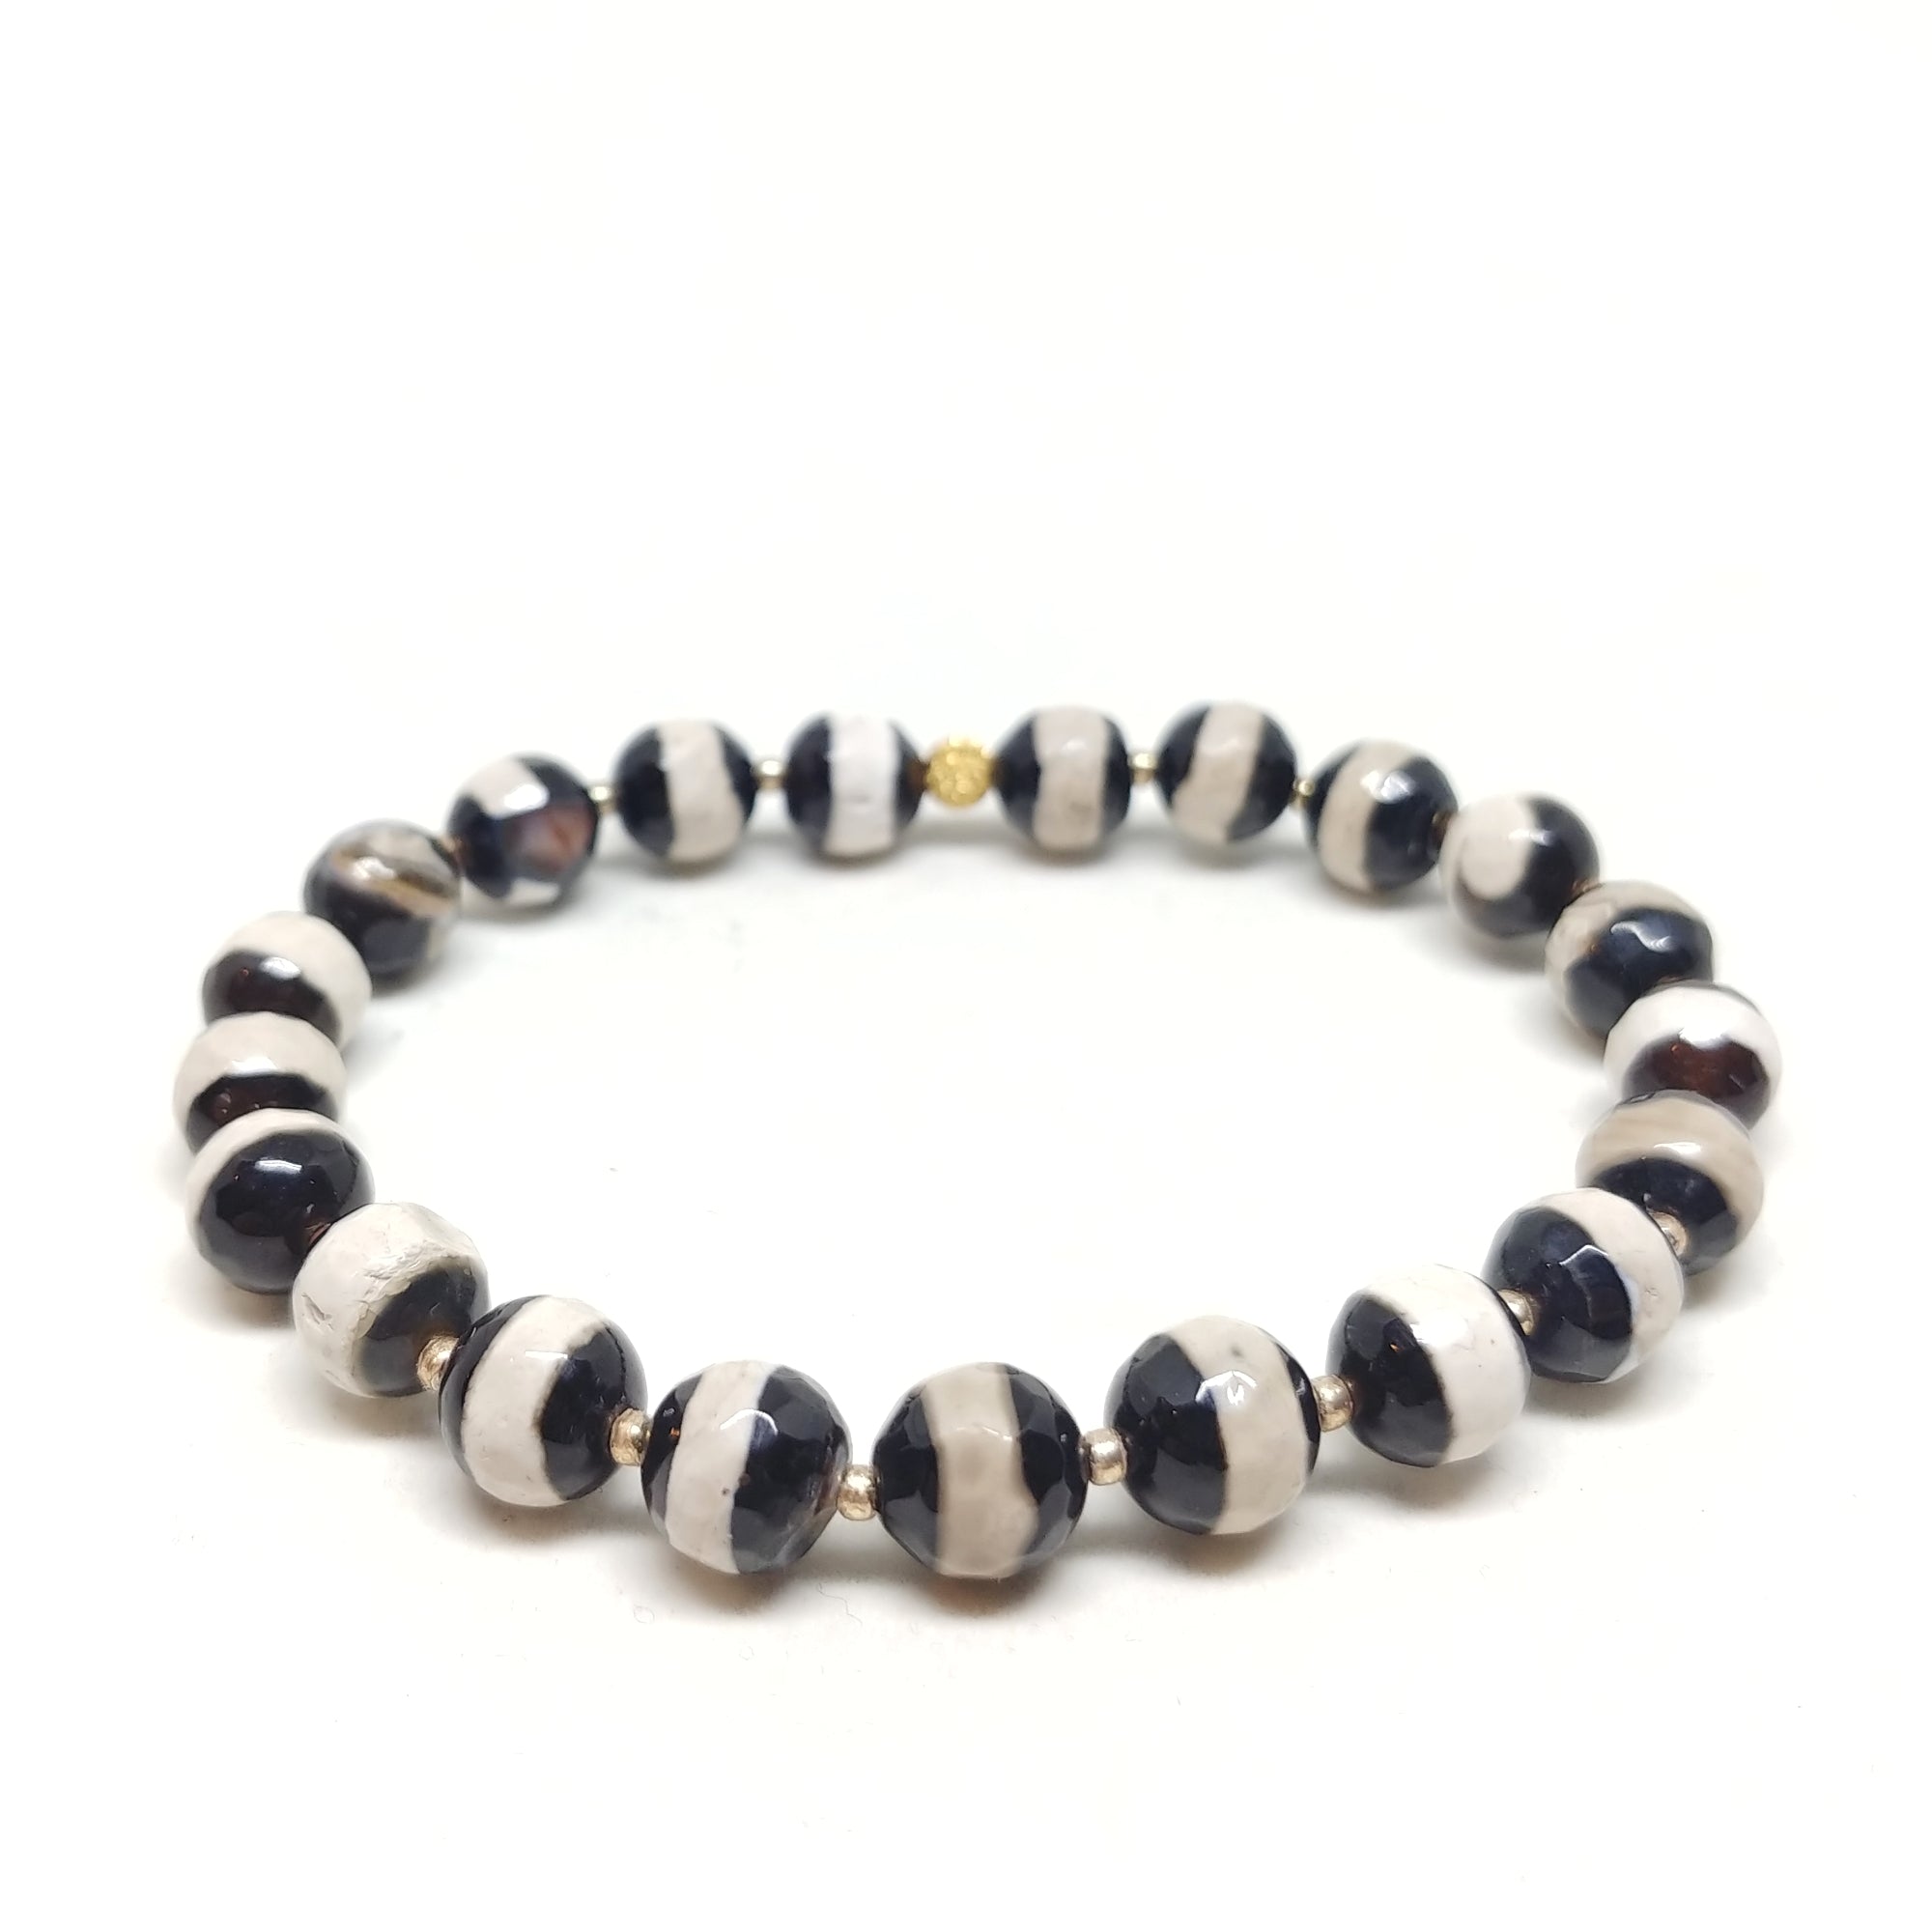 Slot Canyon stretch bracelet, black and white dzi agate beads with gold spacer beads, 7 1/2"